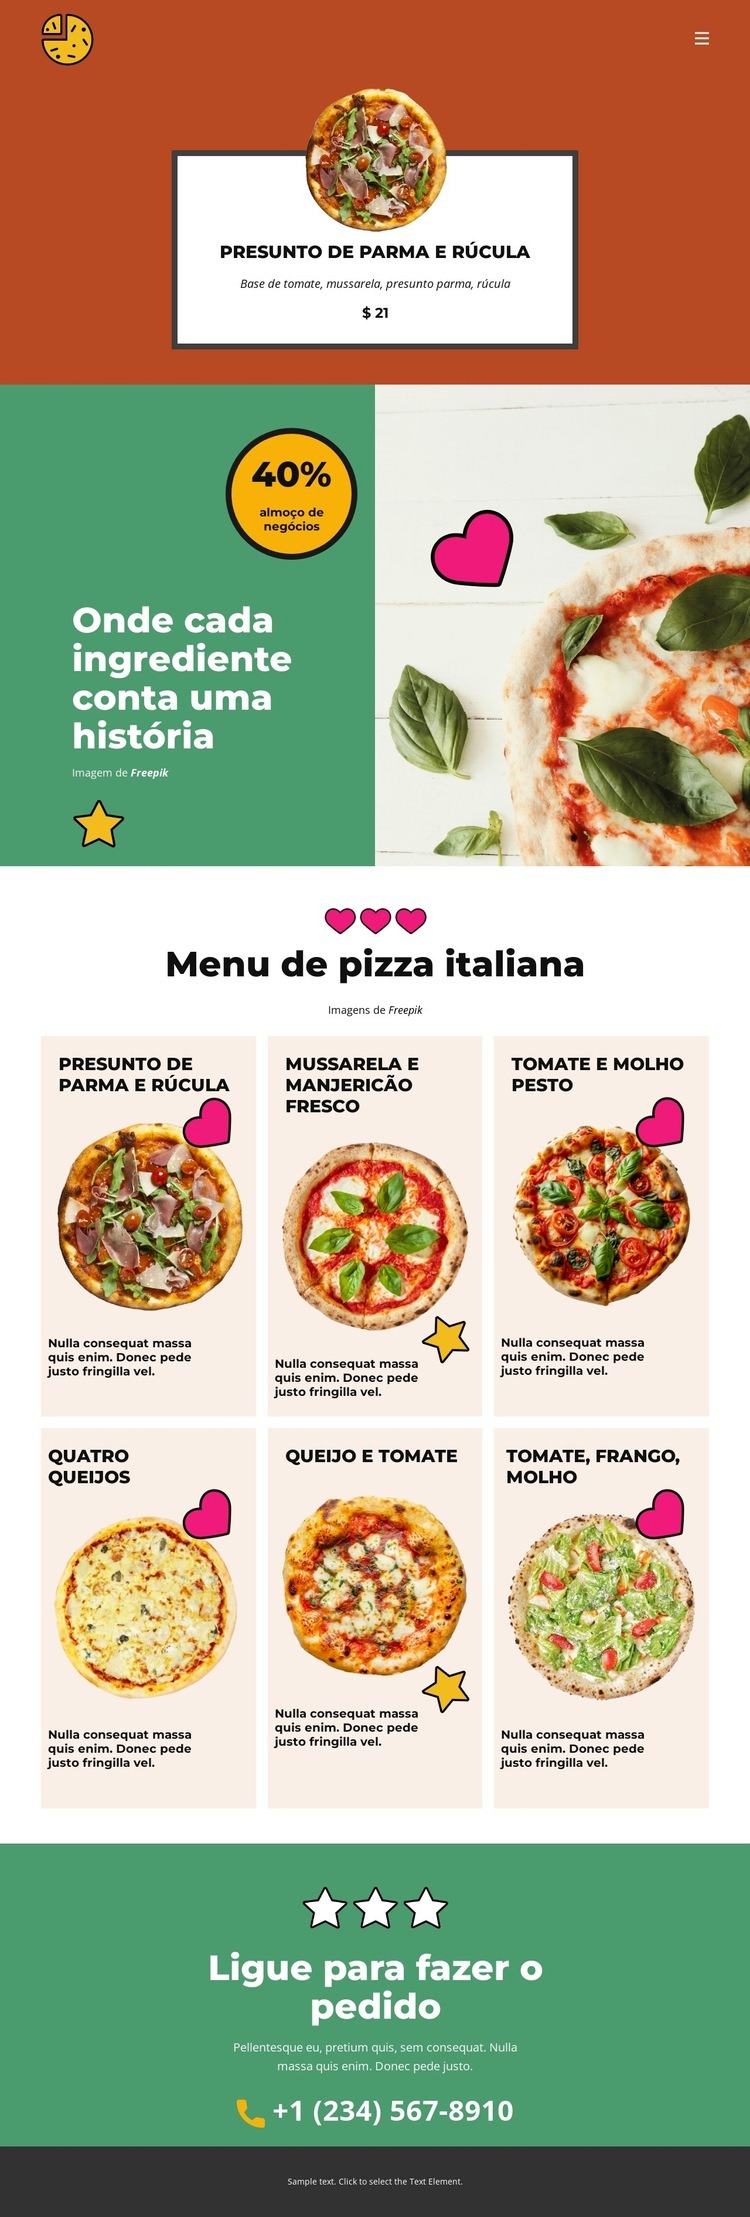 Fun Facts about Pizza Design do site